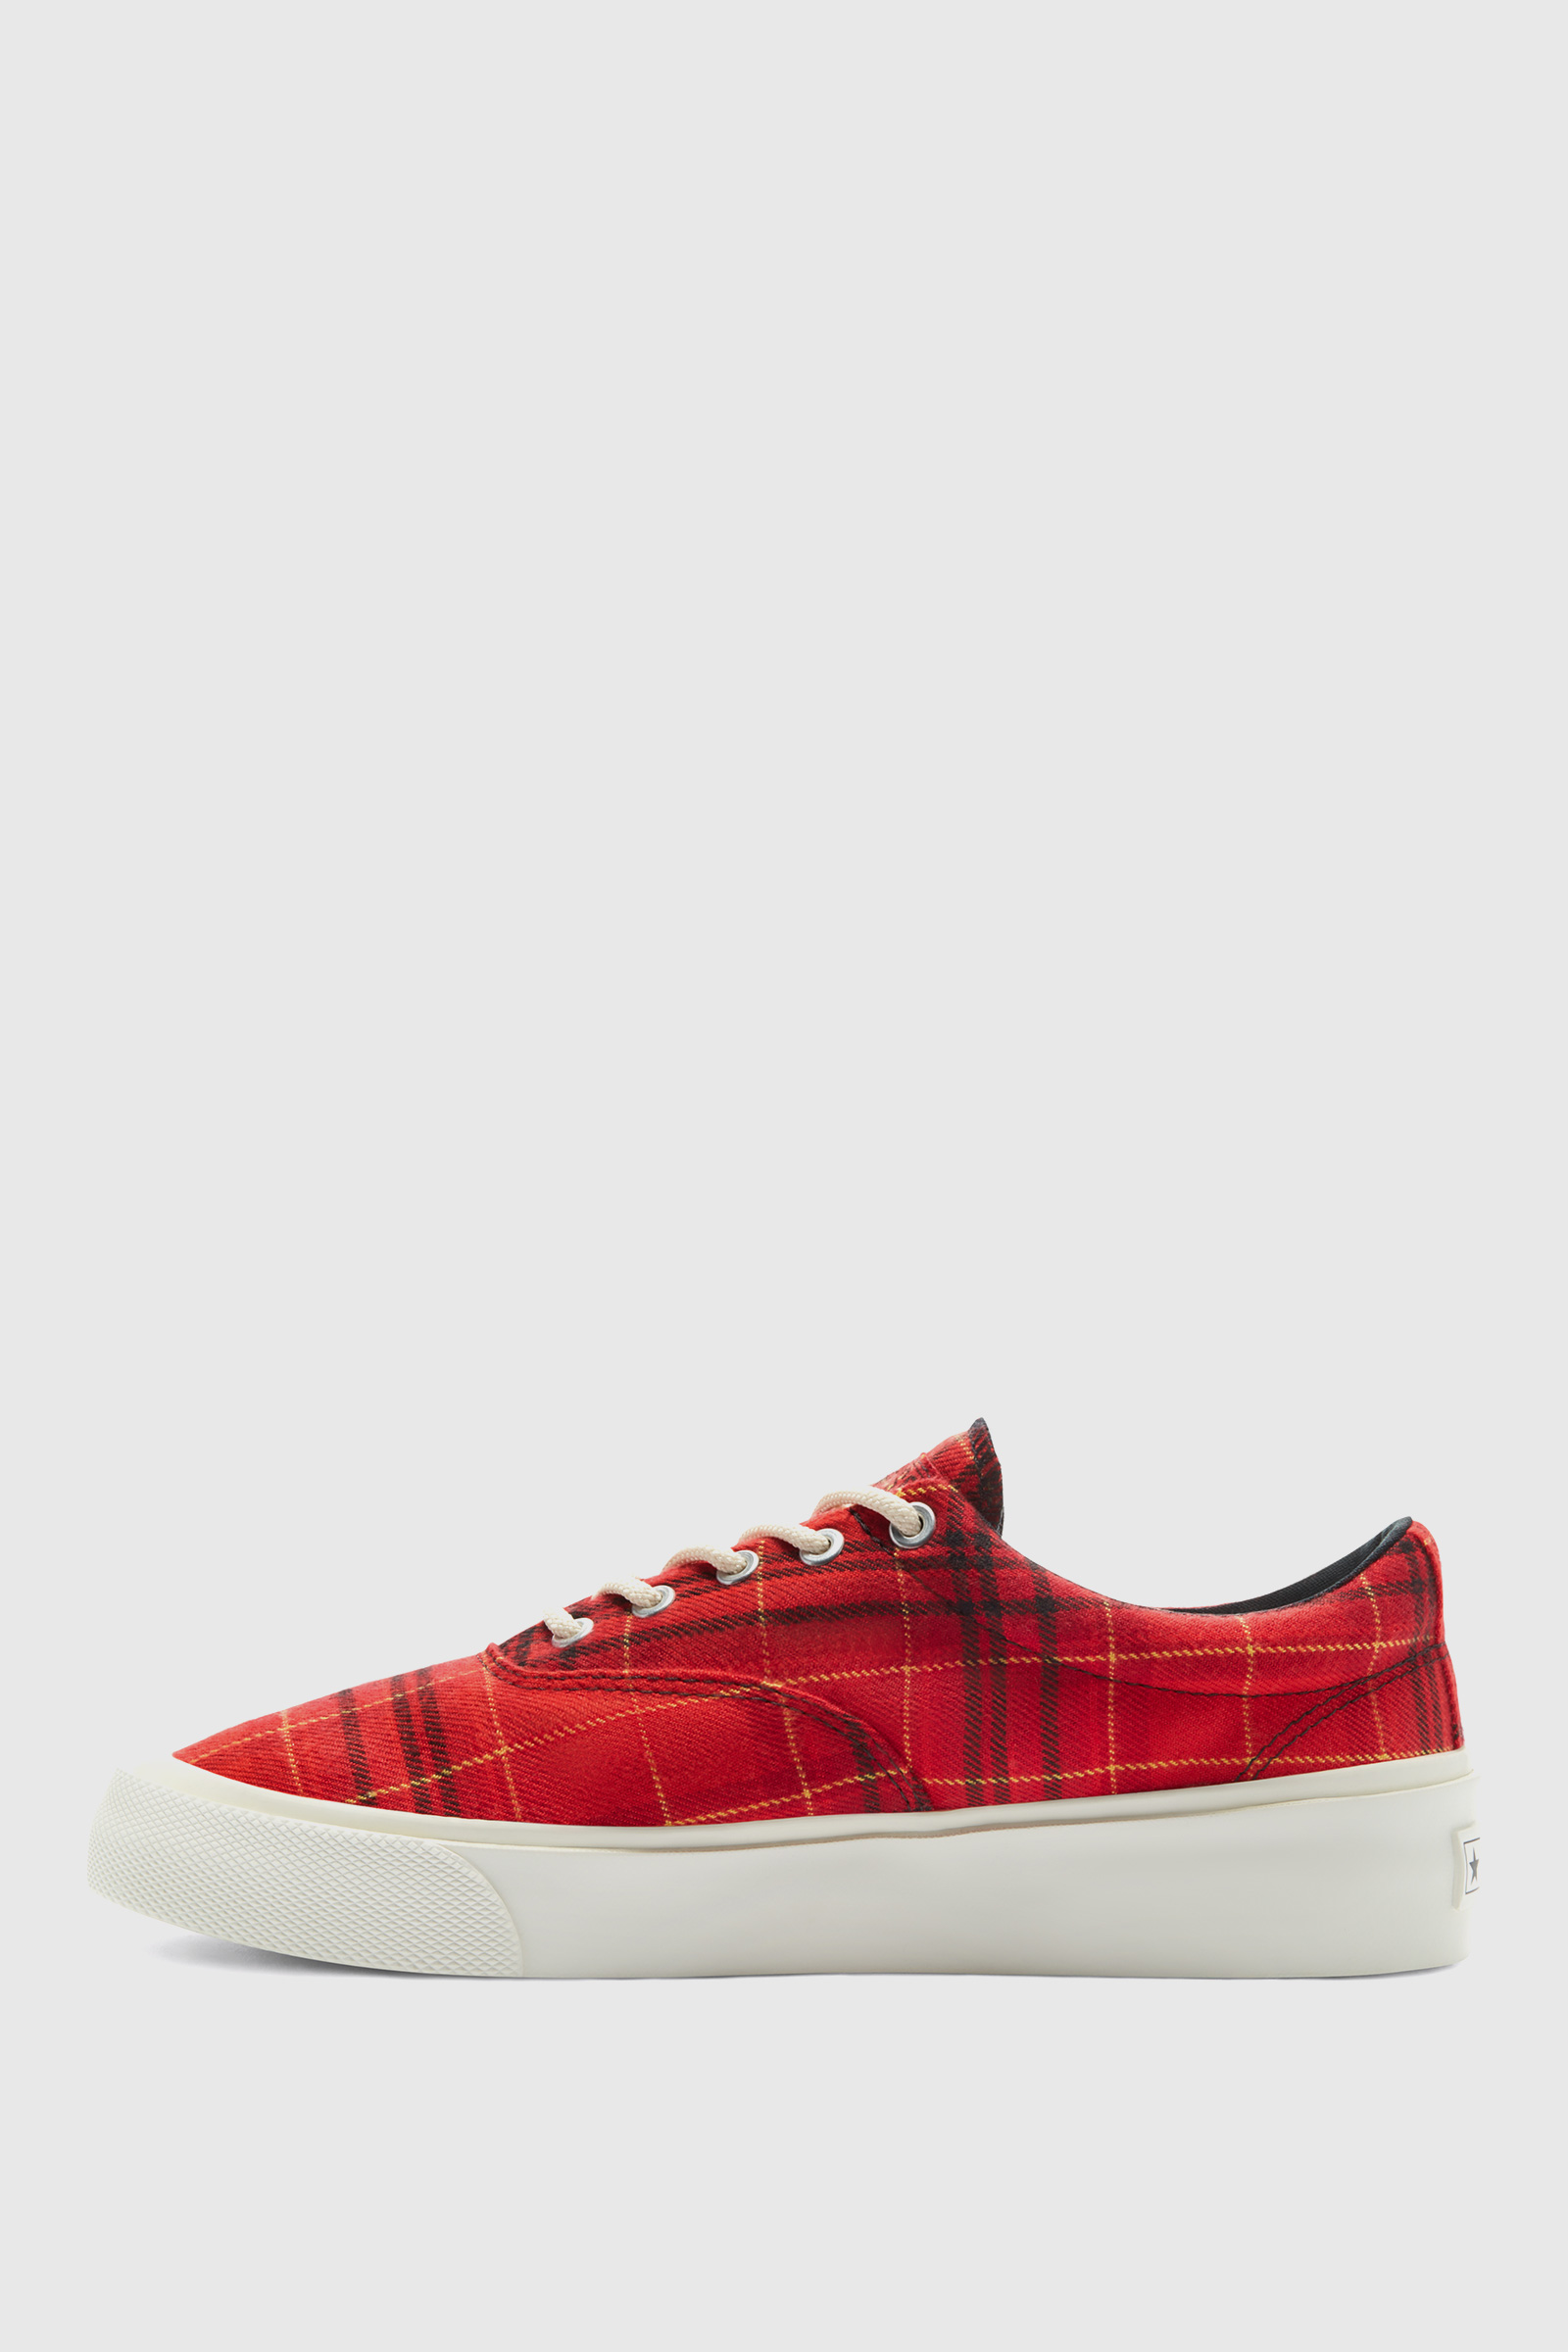 Converse Twisted Plaid Skid Grip Haute red/egret/buttercup | WoodWood.com